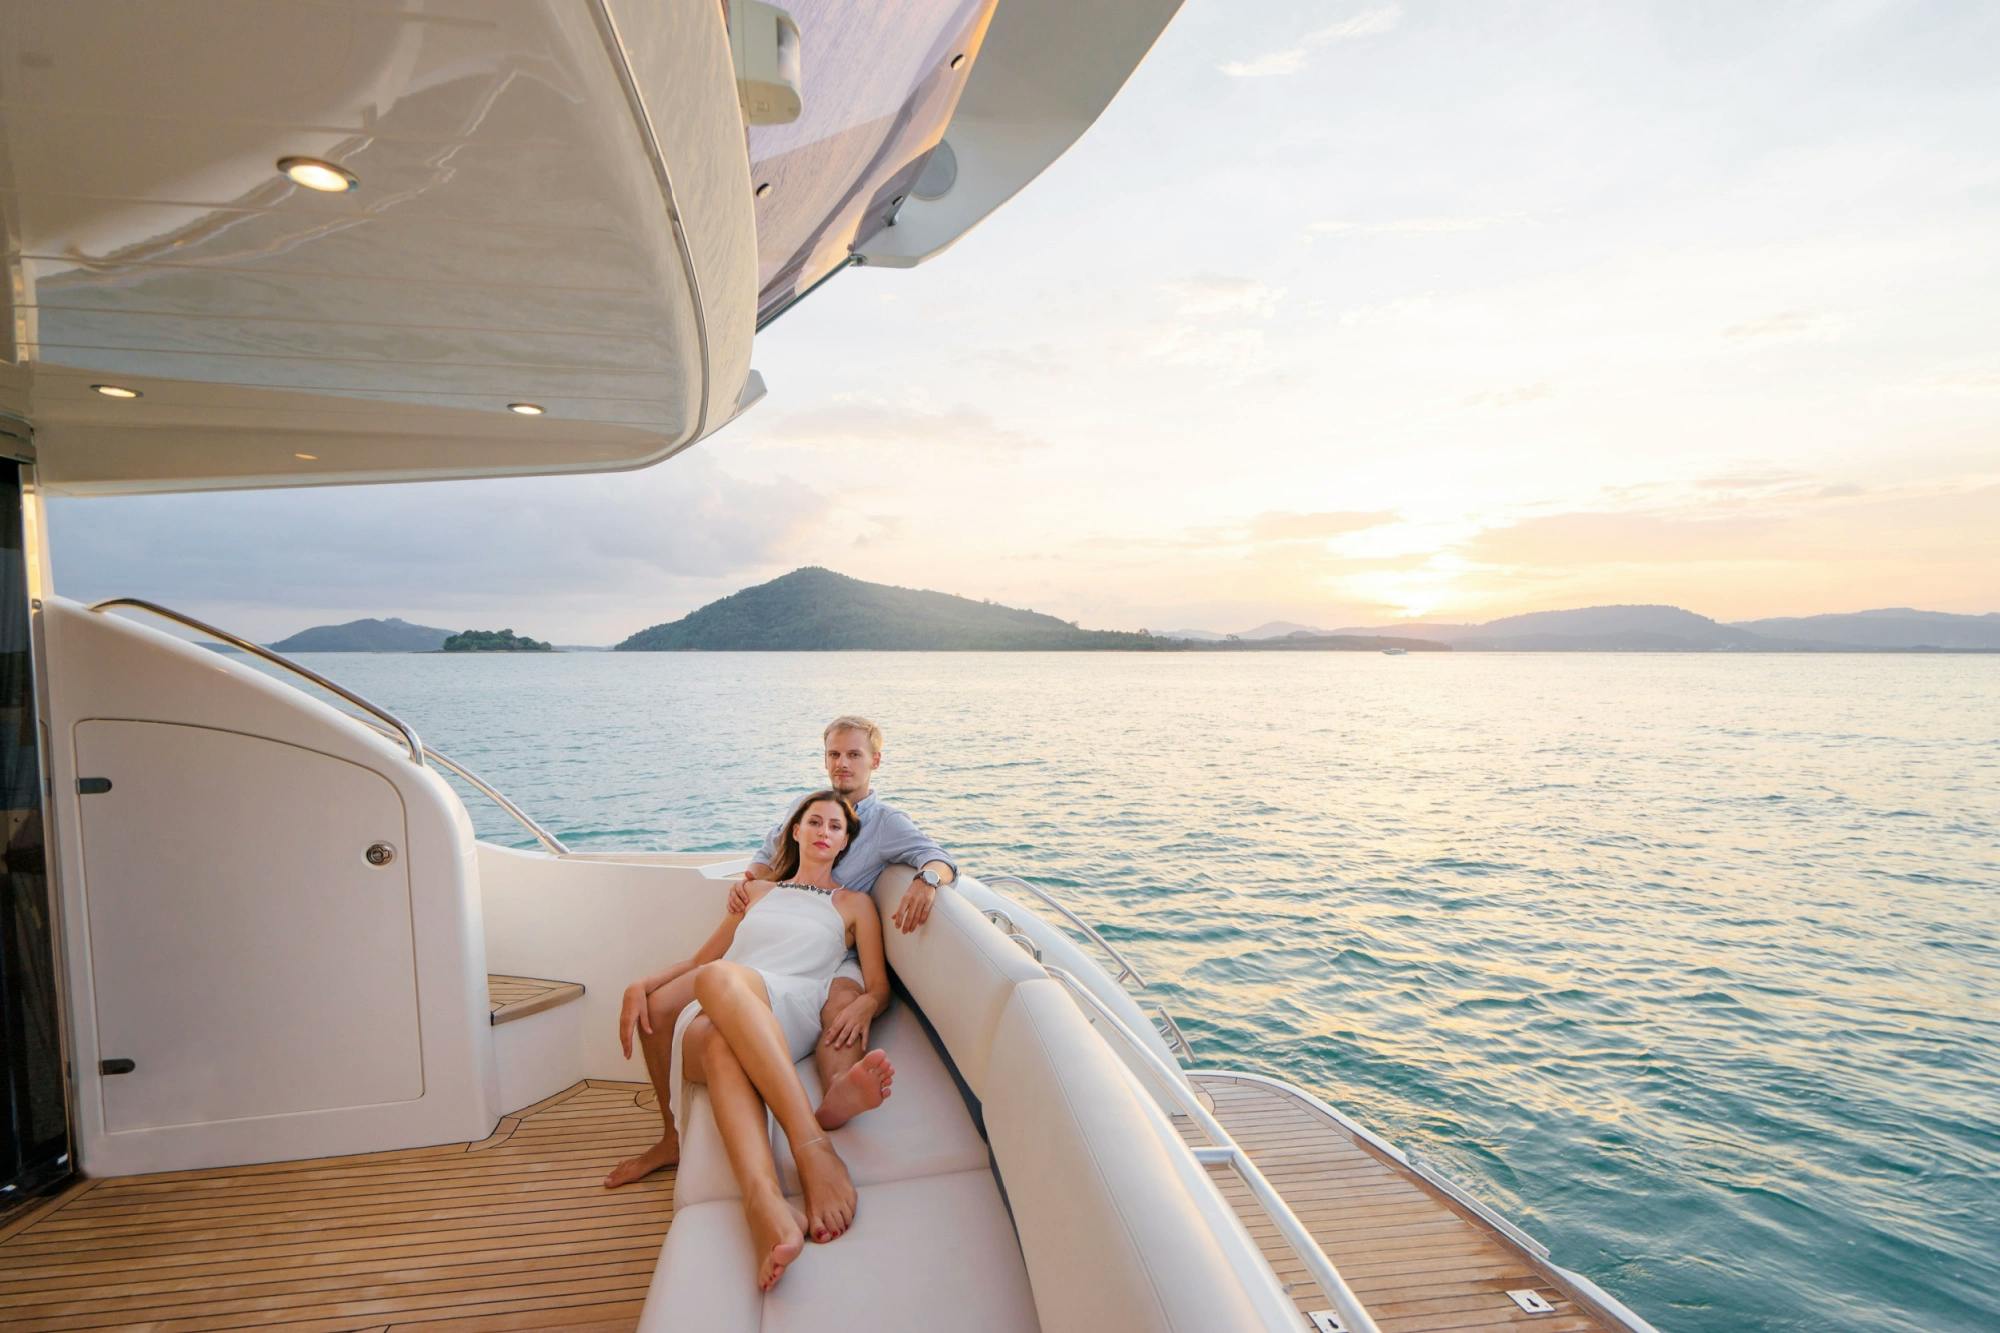 Young couple relaxing on a yacht with mountains in the background.